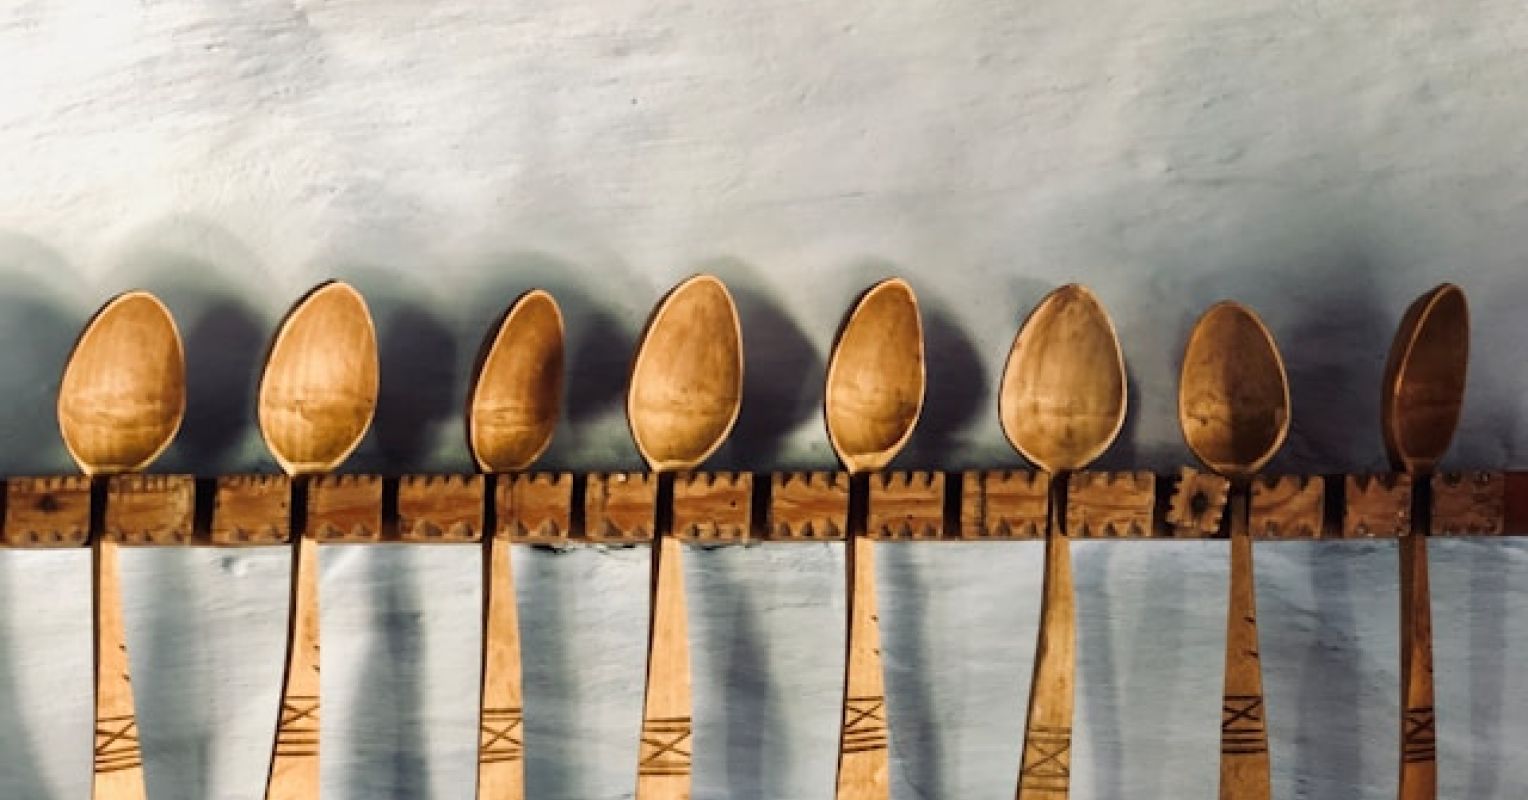 What Is "Spoon Theory"? And Why Is It Important?